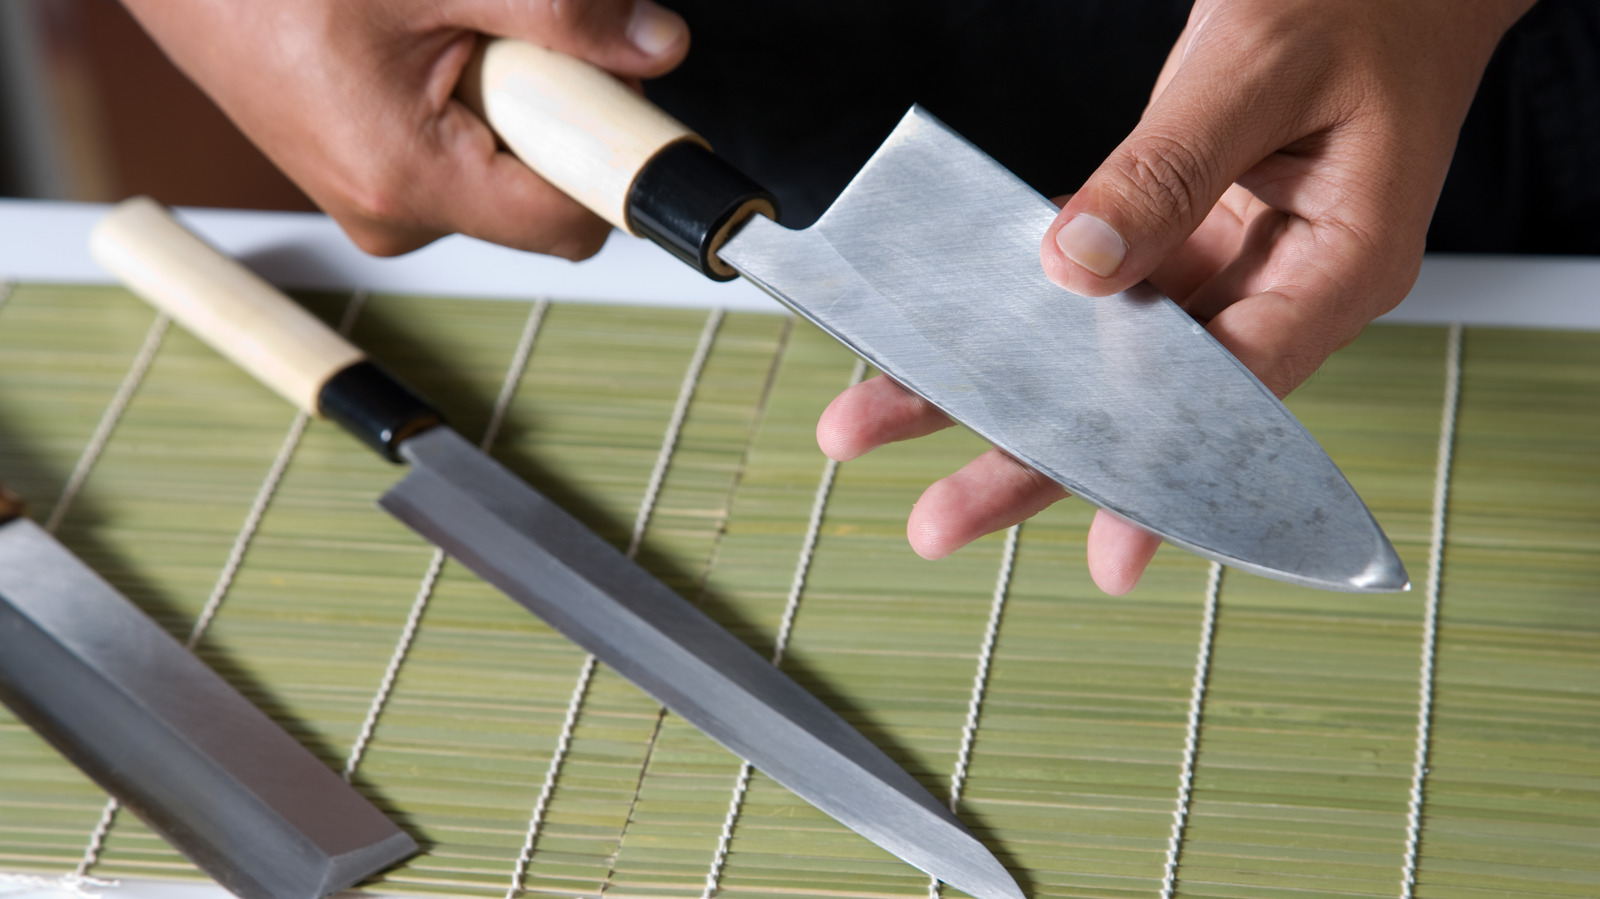 How To Sharpen a Kitchen Knife - Beginner's Guide to Knife